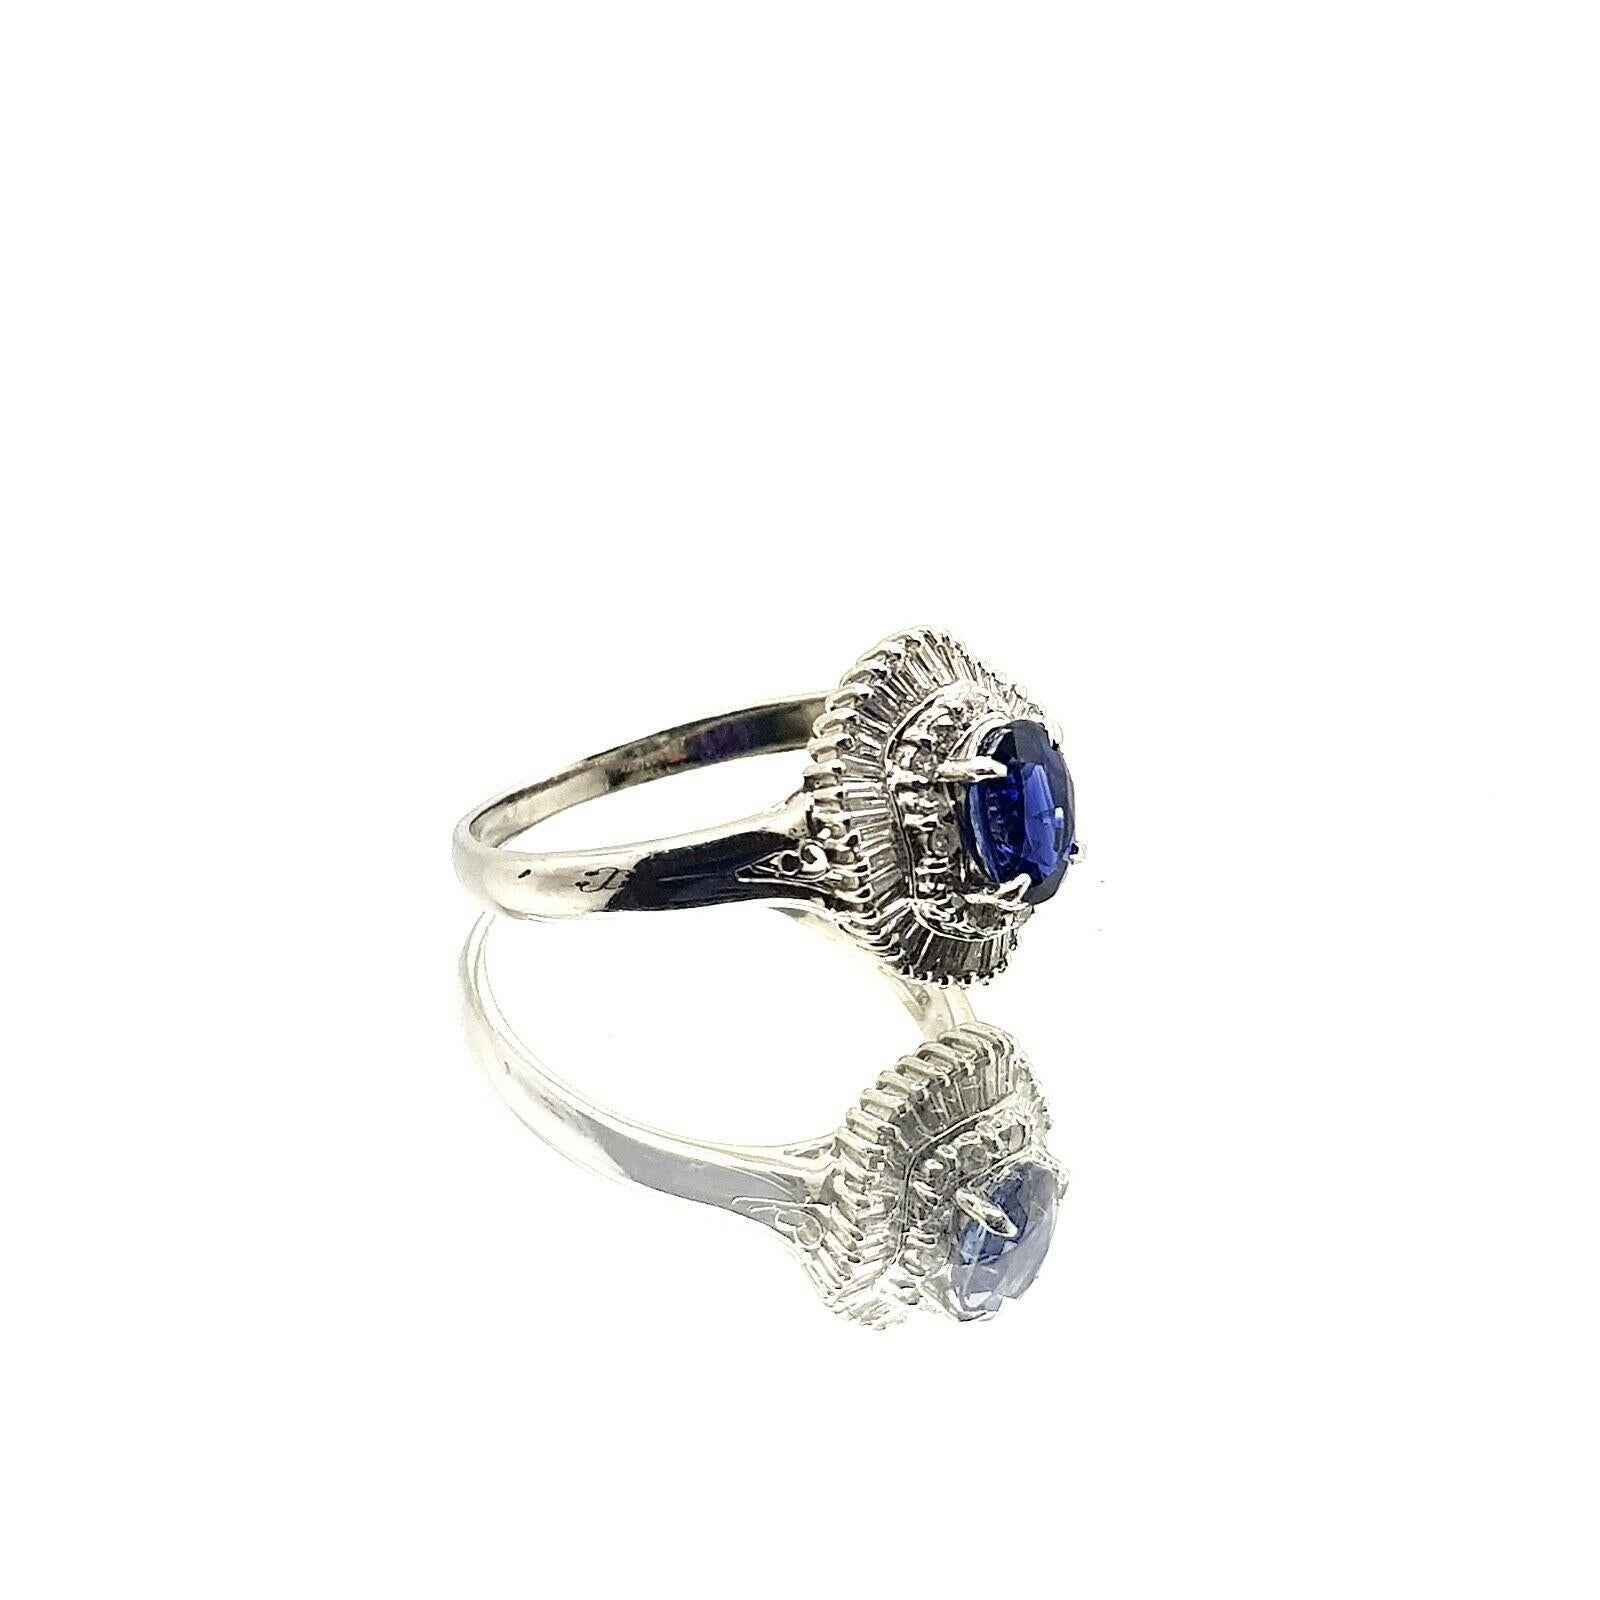  This is beautiful platinum ring with nice intence blue sapphire and diamonds. It looks very elegant on the hand. The current ring size is 7.25US, but it can be resized. 
Specifications:
    main stone: BLUE SAPPHIRE  0.90 ct
    additional: ROUND